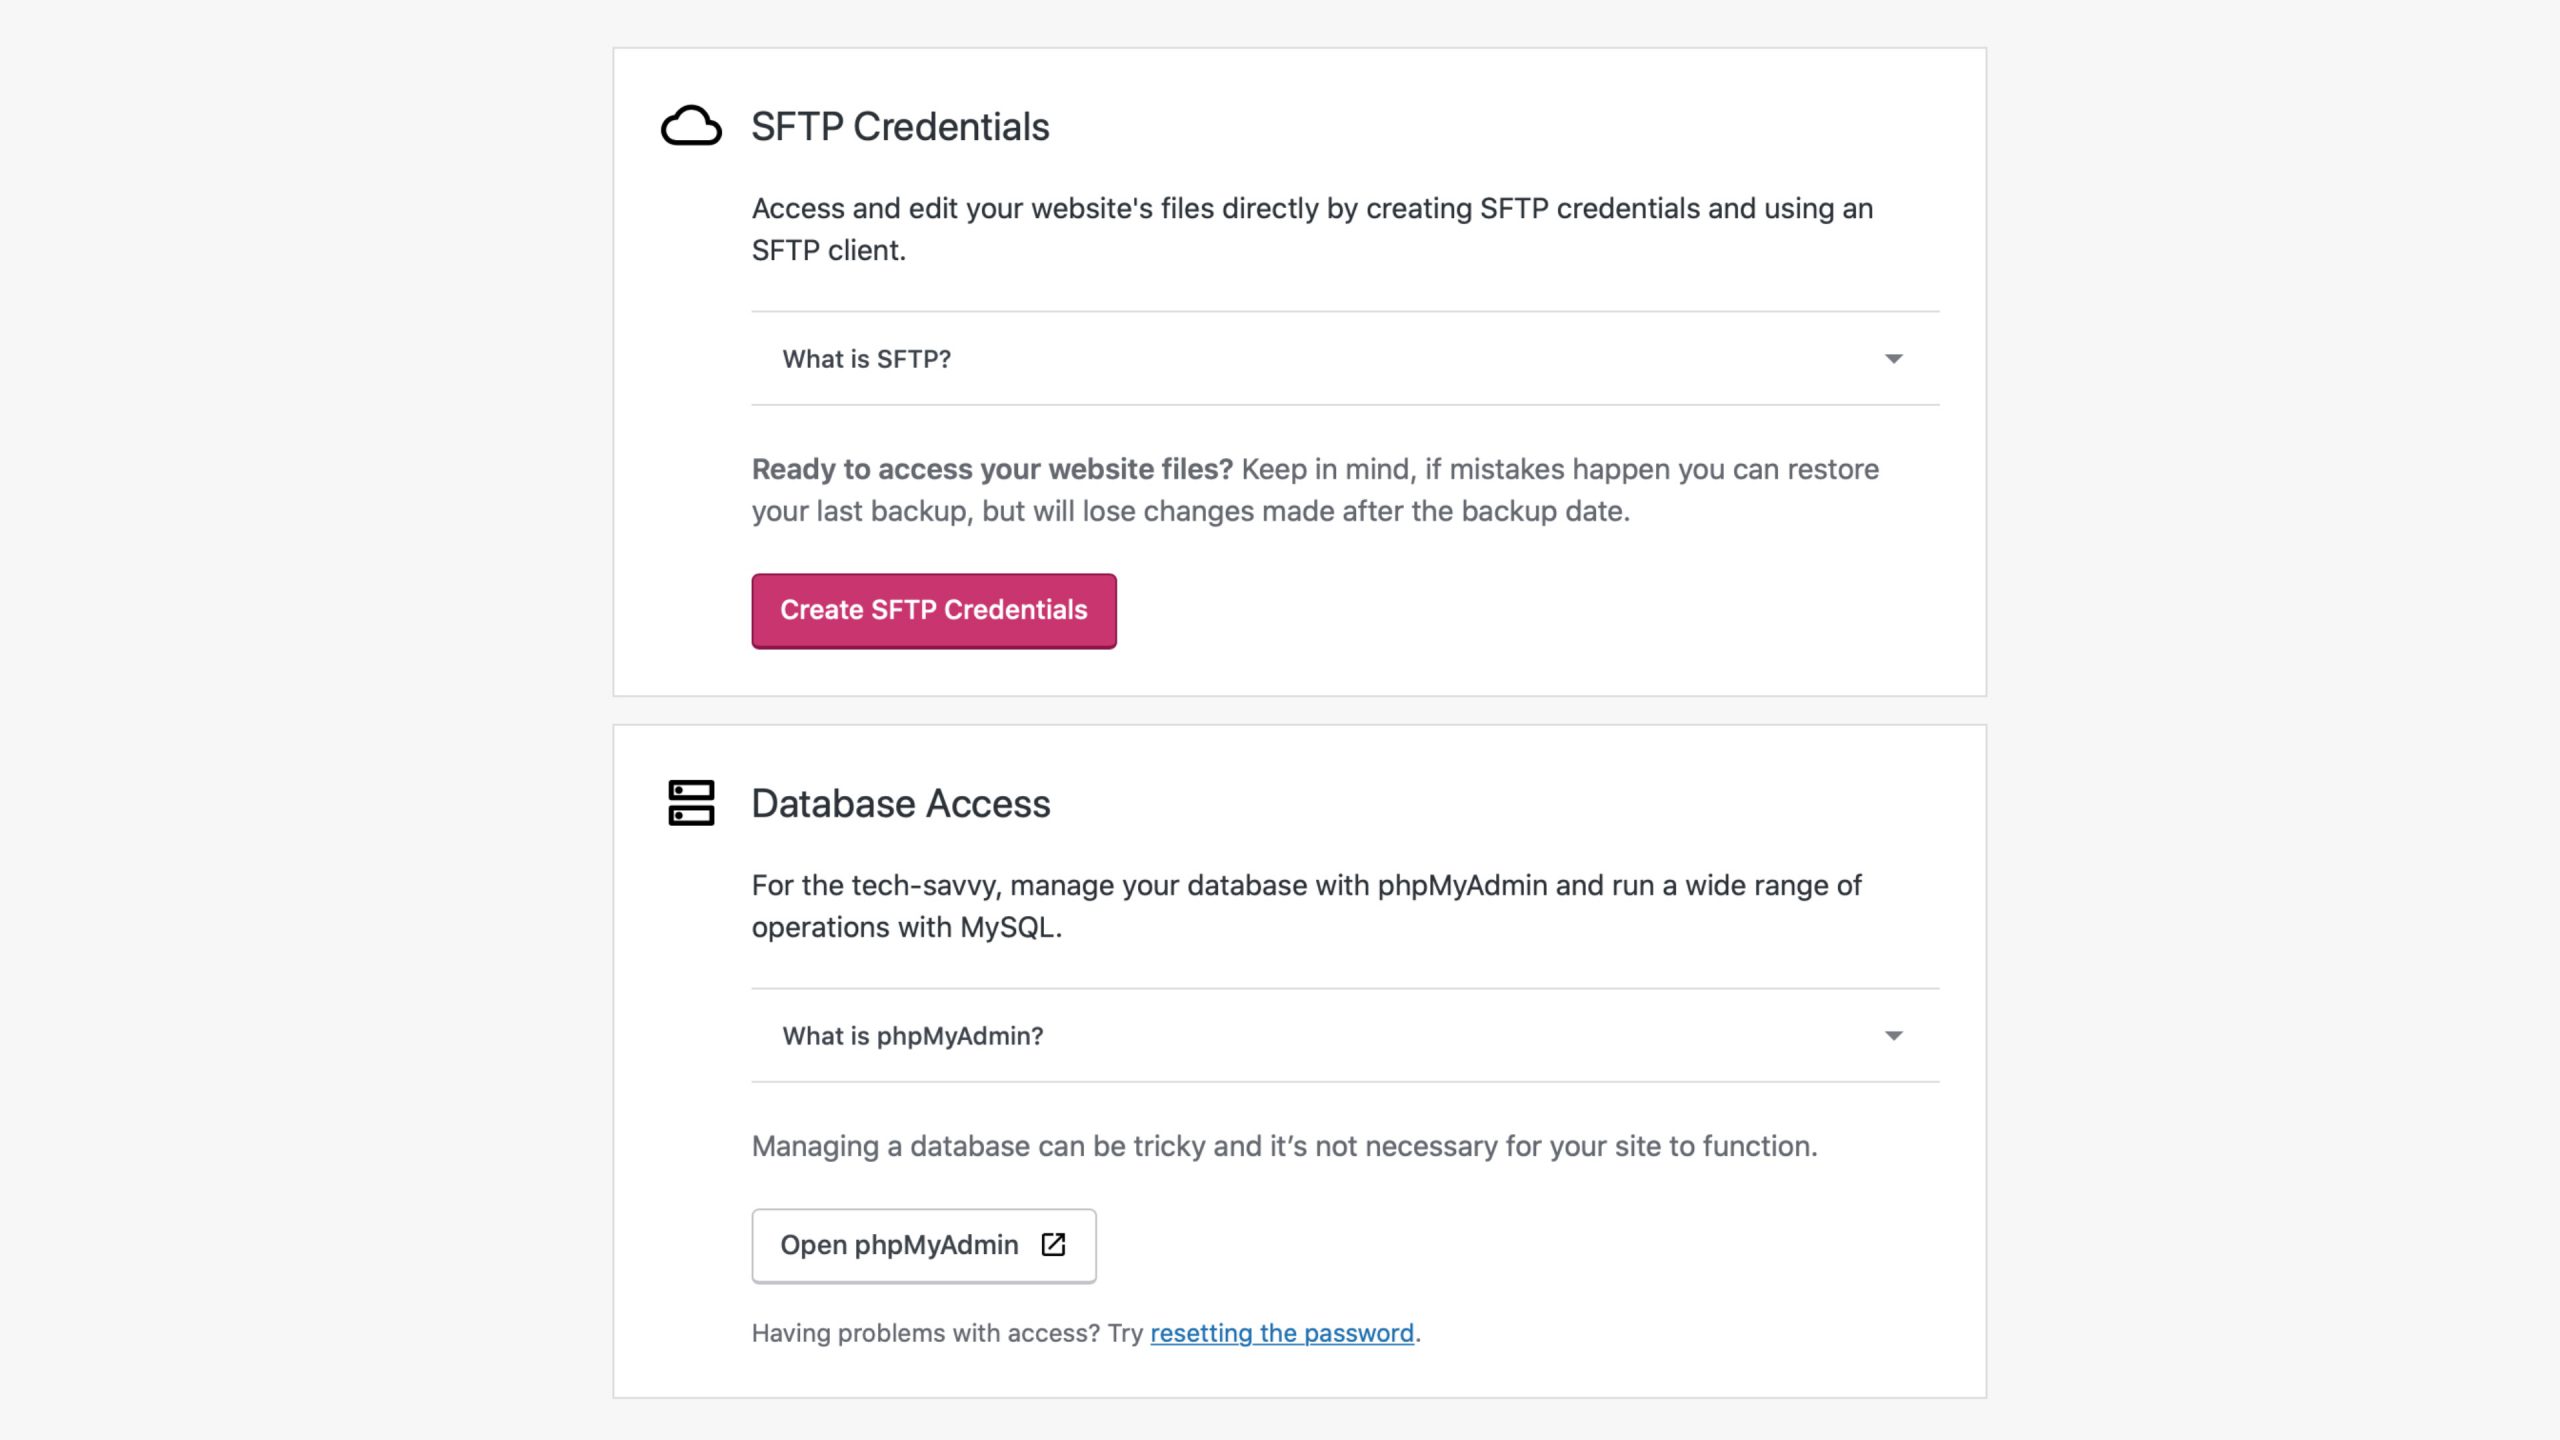 wordpress com launches sftp and phpmyadmin access on business and ecommerce plans scaled 1